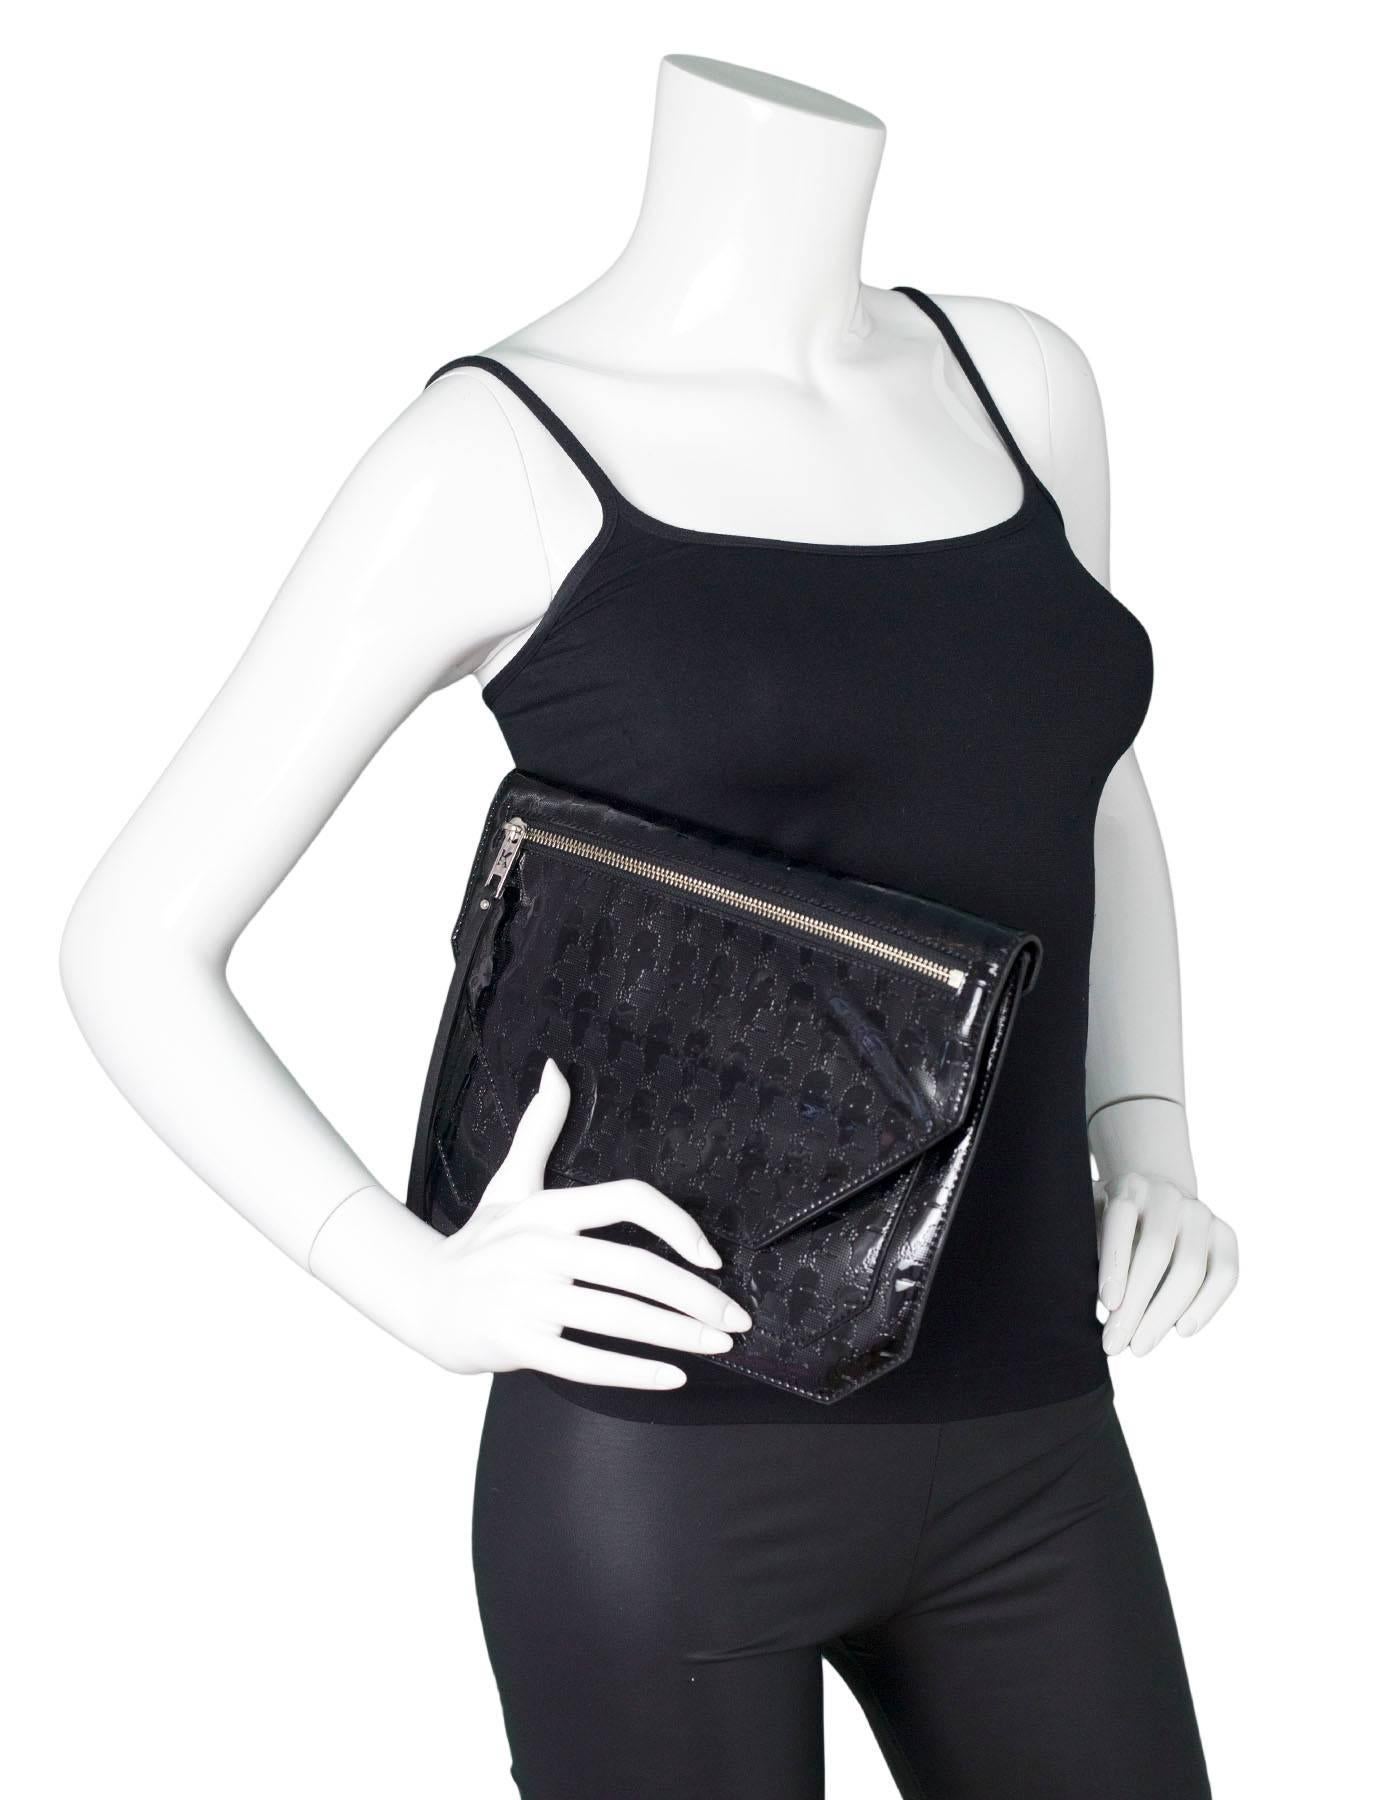 Karl Lagerfeld Black Patent Clutch

Color: Black
Hardware: Silvertone
Materials: Patent leather
Lining: Pink textile
Closure/Opening: Flap top with snap closure
Exterior Pockets: Front zip pocket
Interior Pockets: Two compartments, one wall